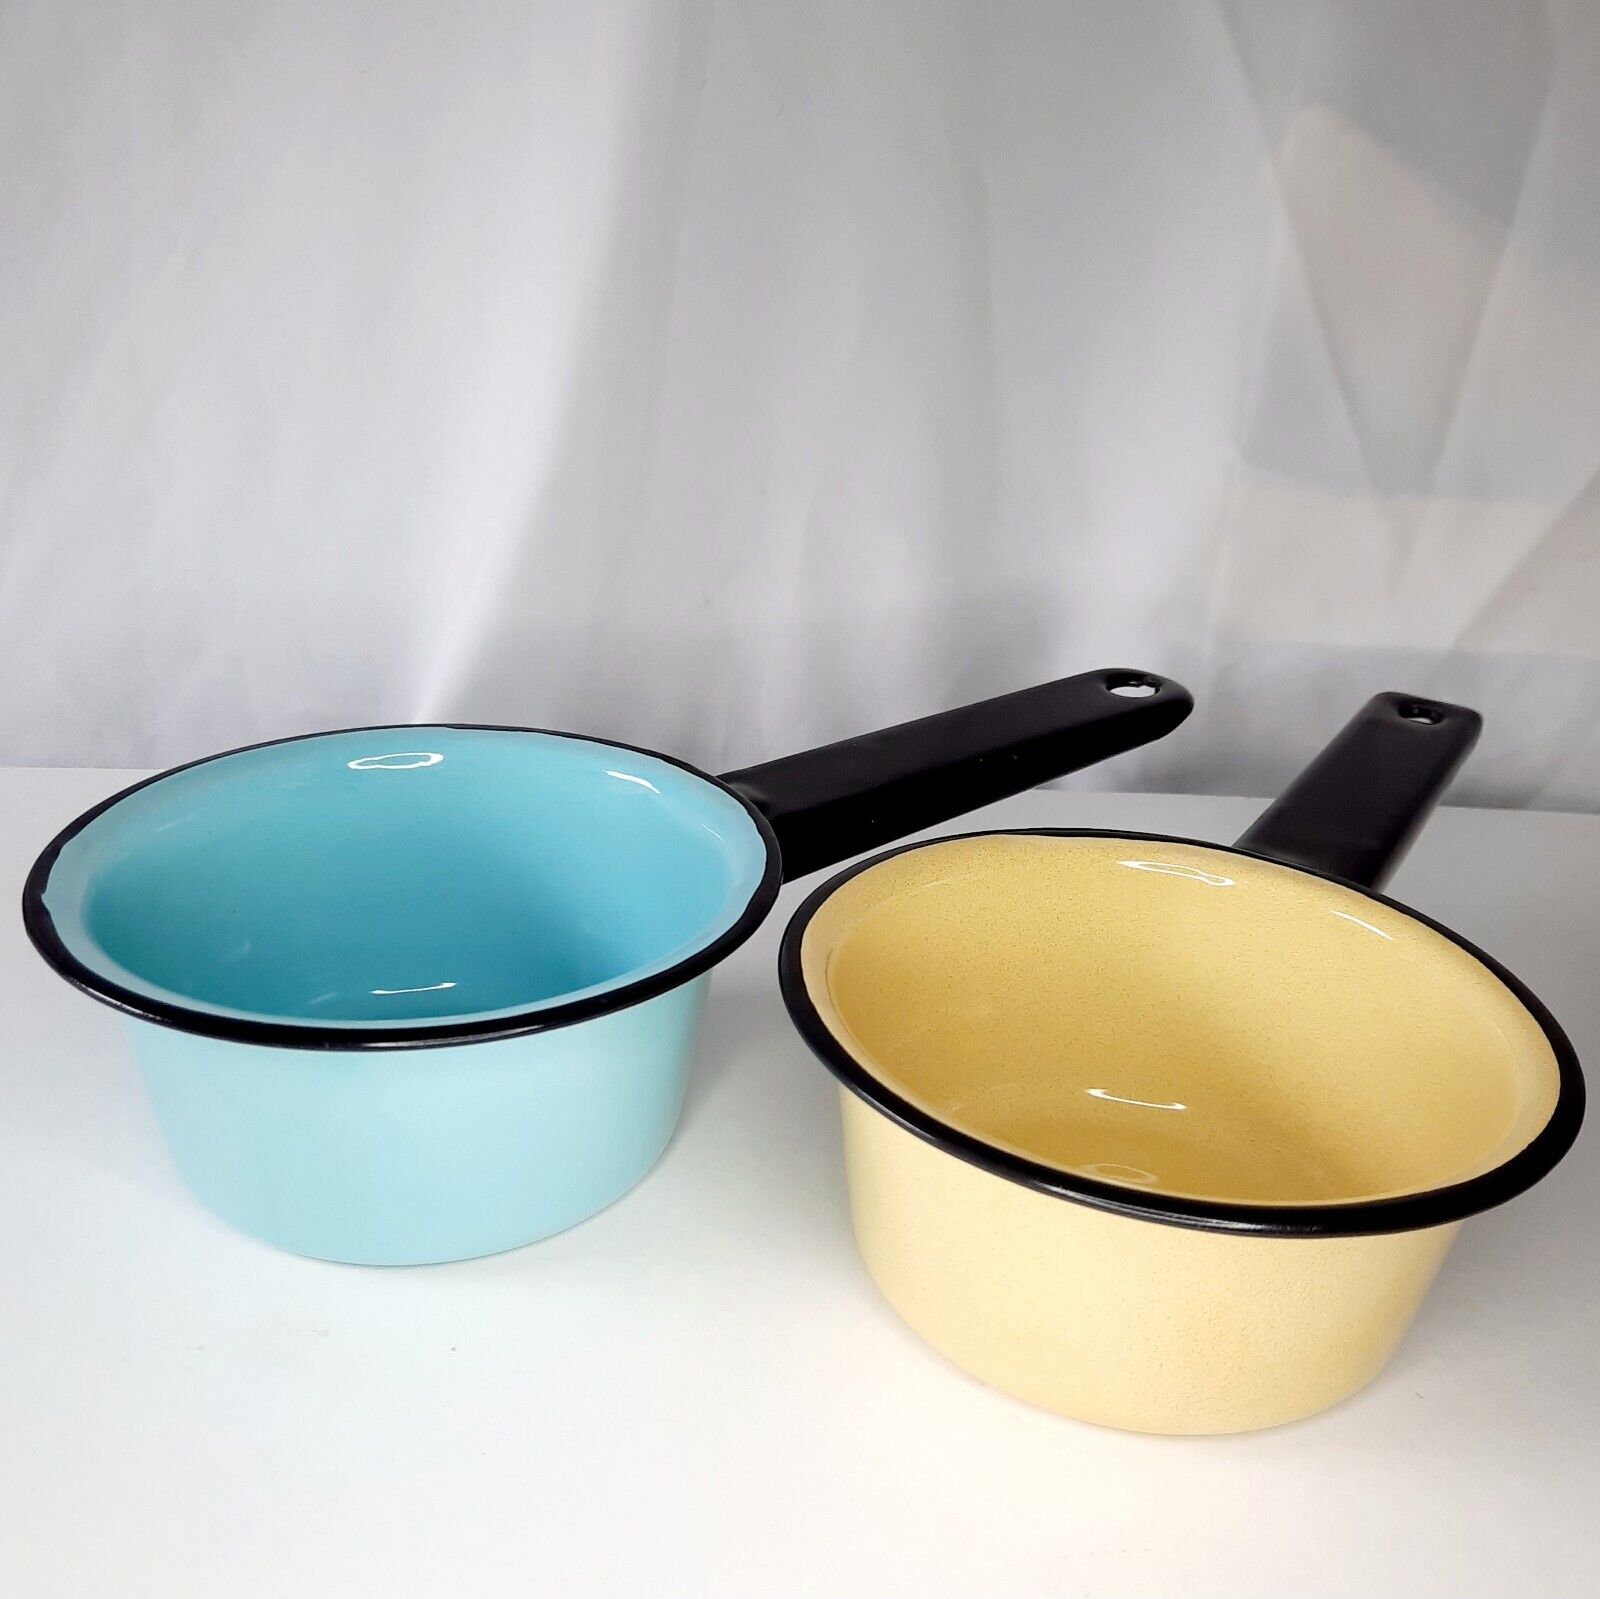 2 Vintage Small Enamel Ware Sauce Pans Blue and Yellow with Black Handles